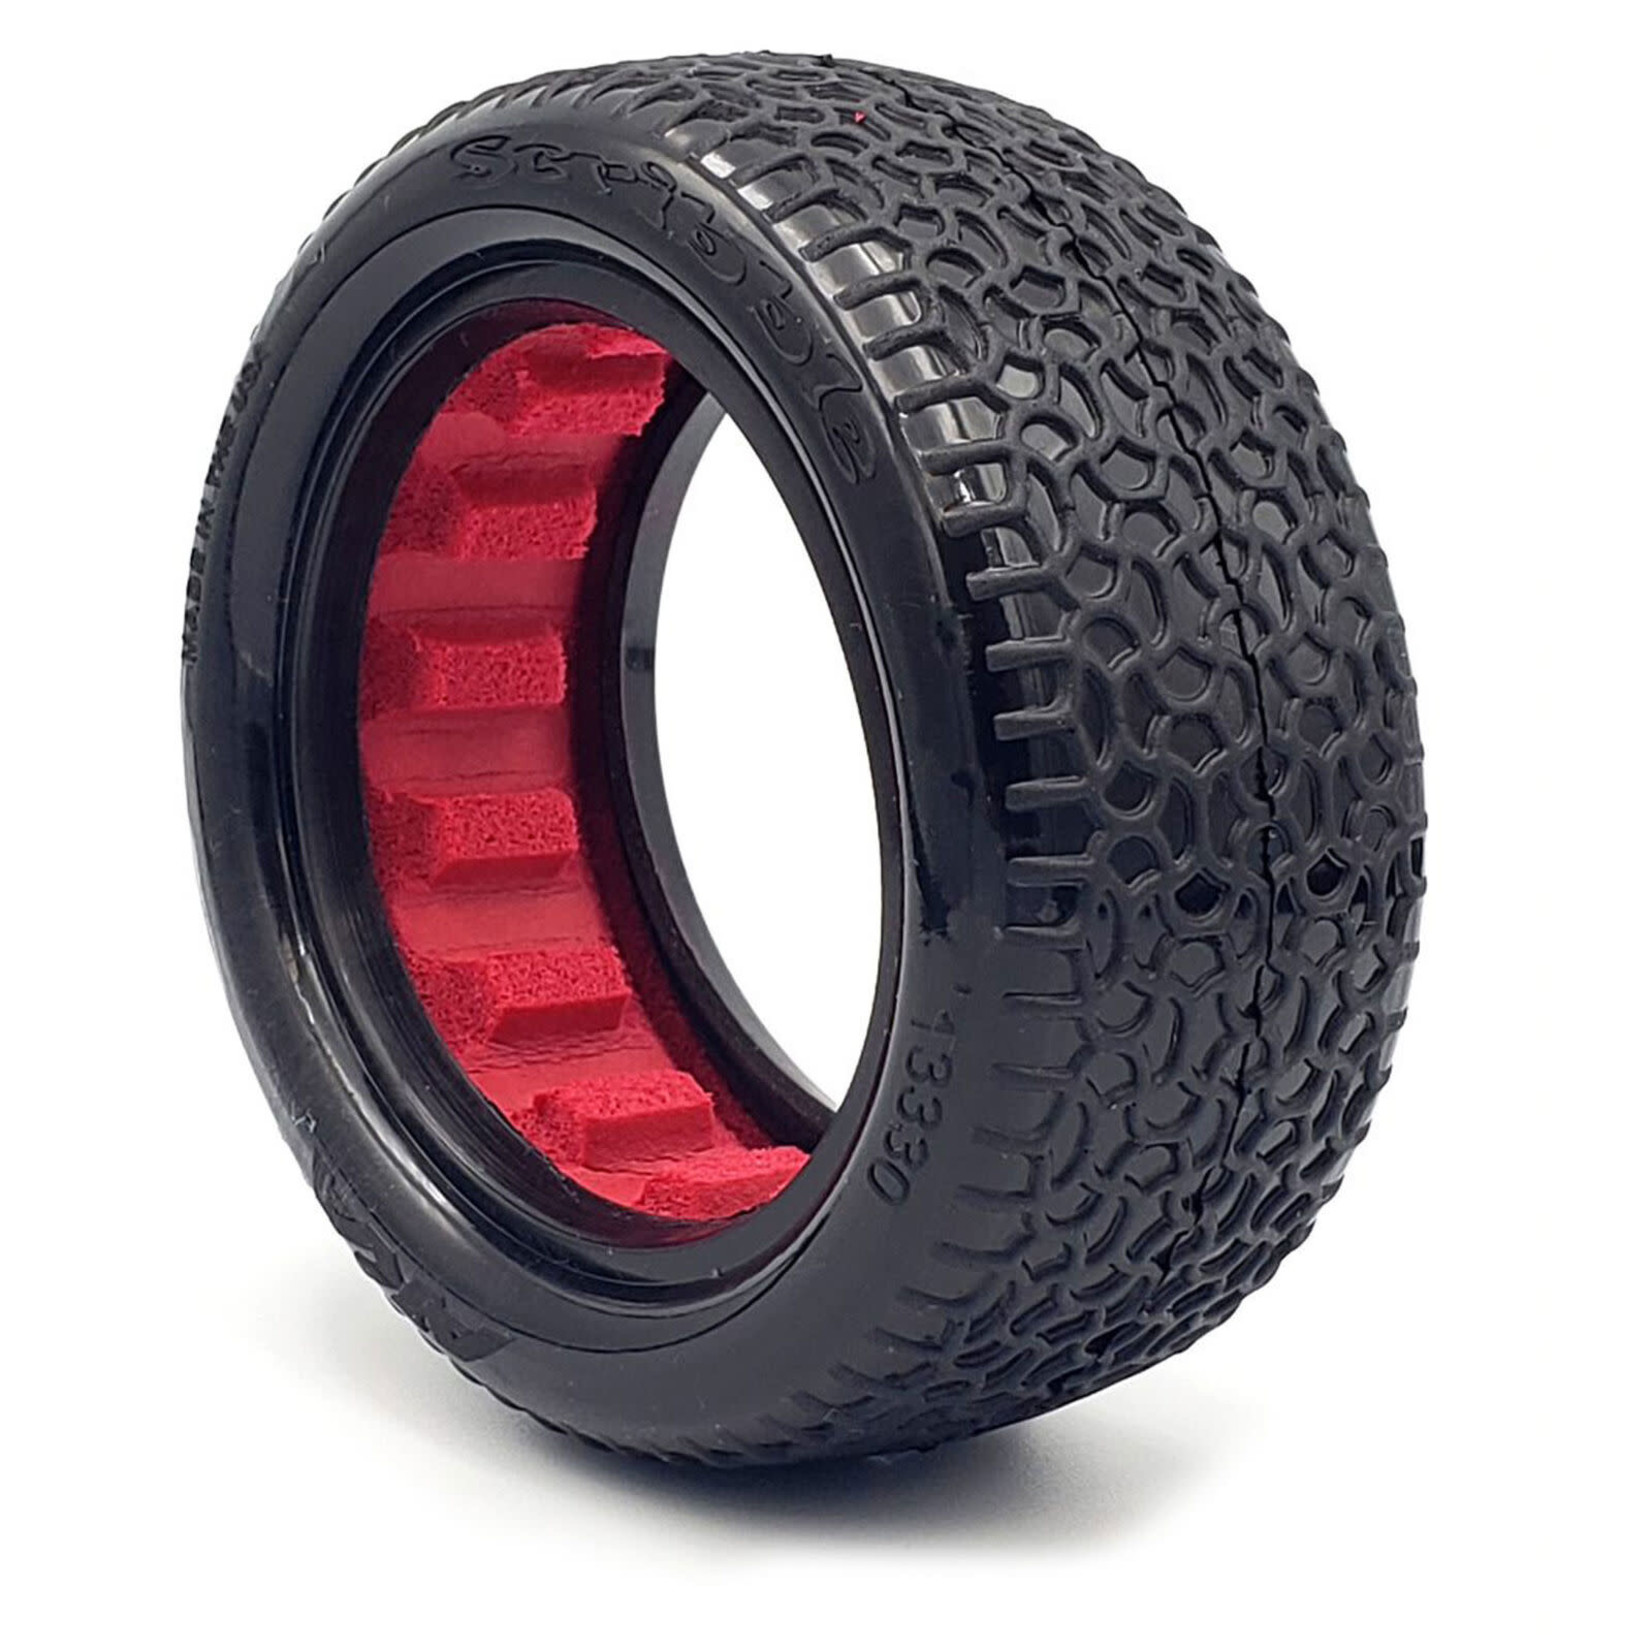 AKA AKA13330CR AKA 1/10 Scribble Front 4WD 2.2 Tires, Clay with Red Inserts (2): Buggy